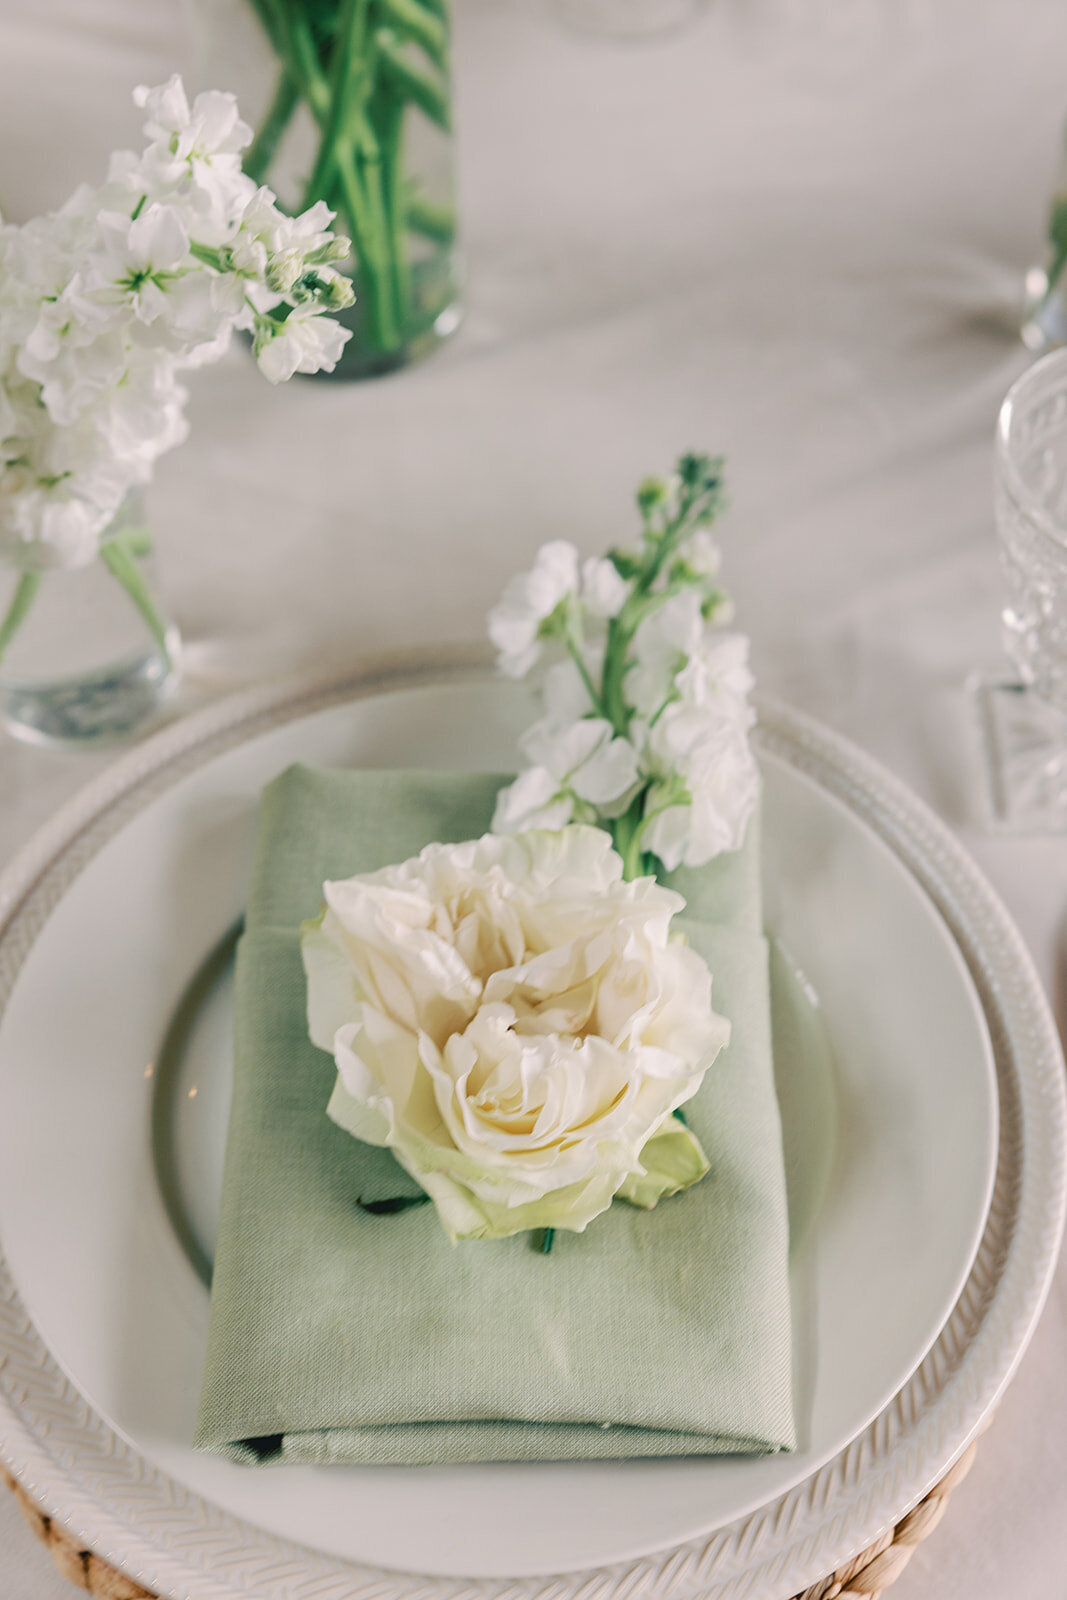 Place setting with white plates, a green napkin, and white flowers